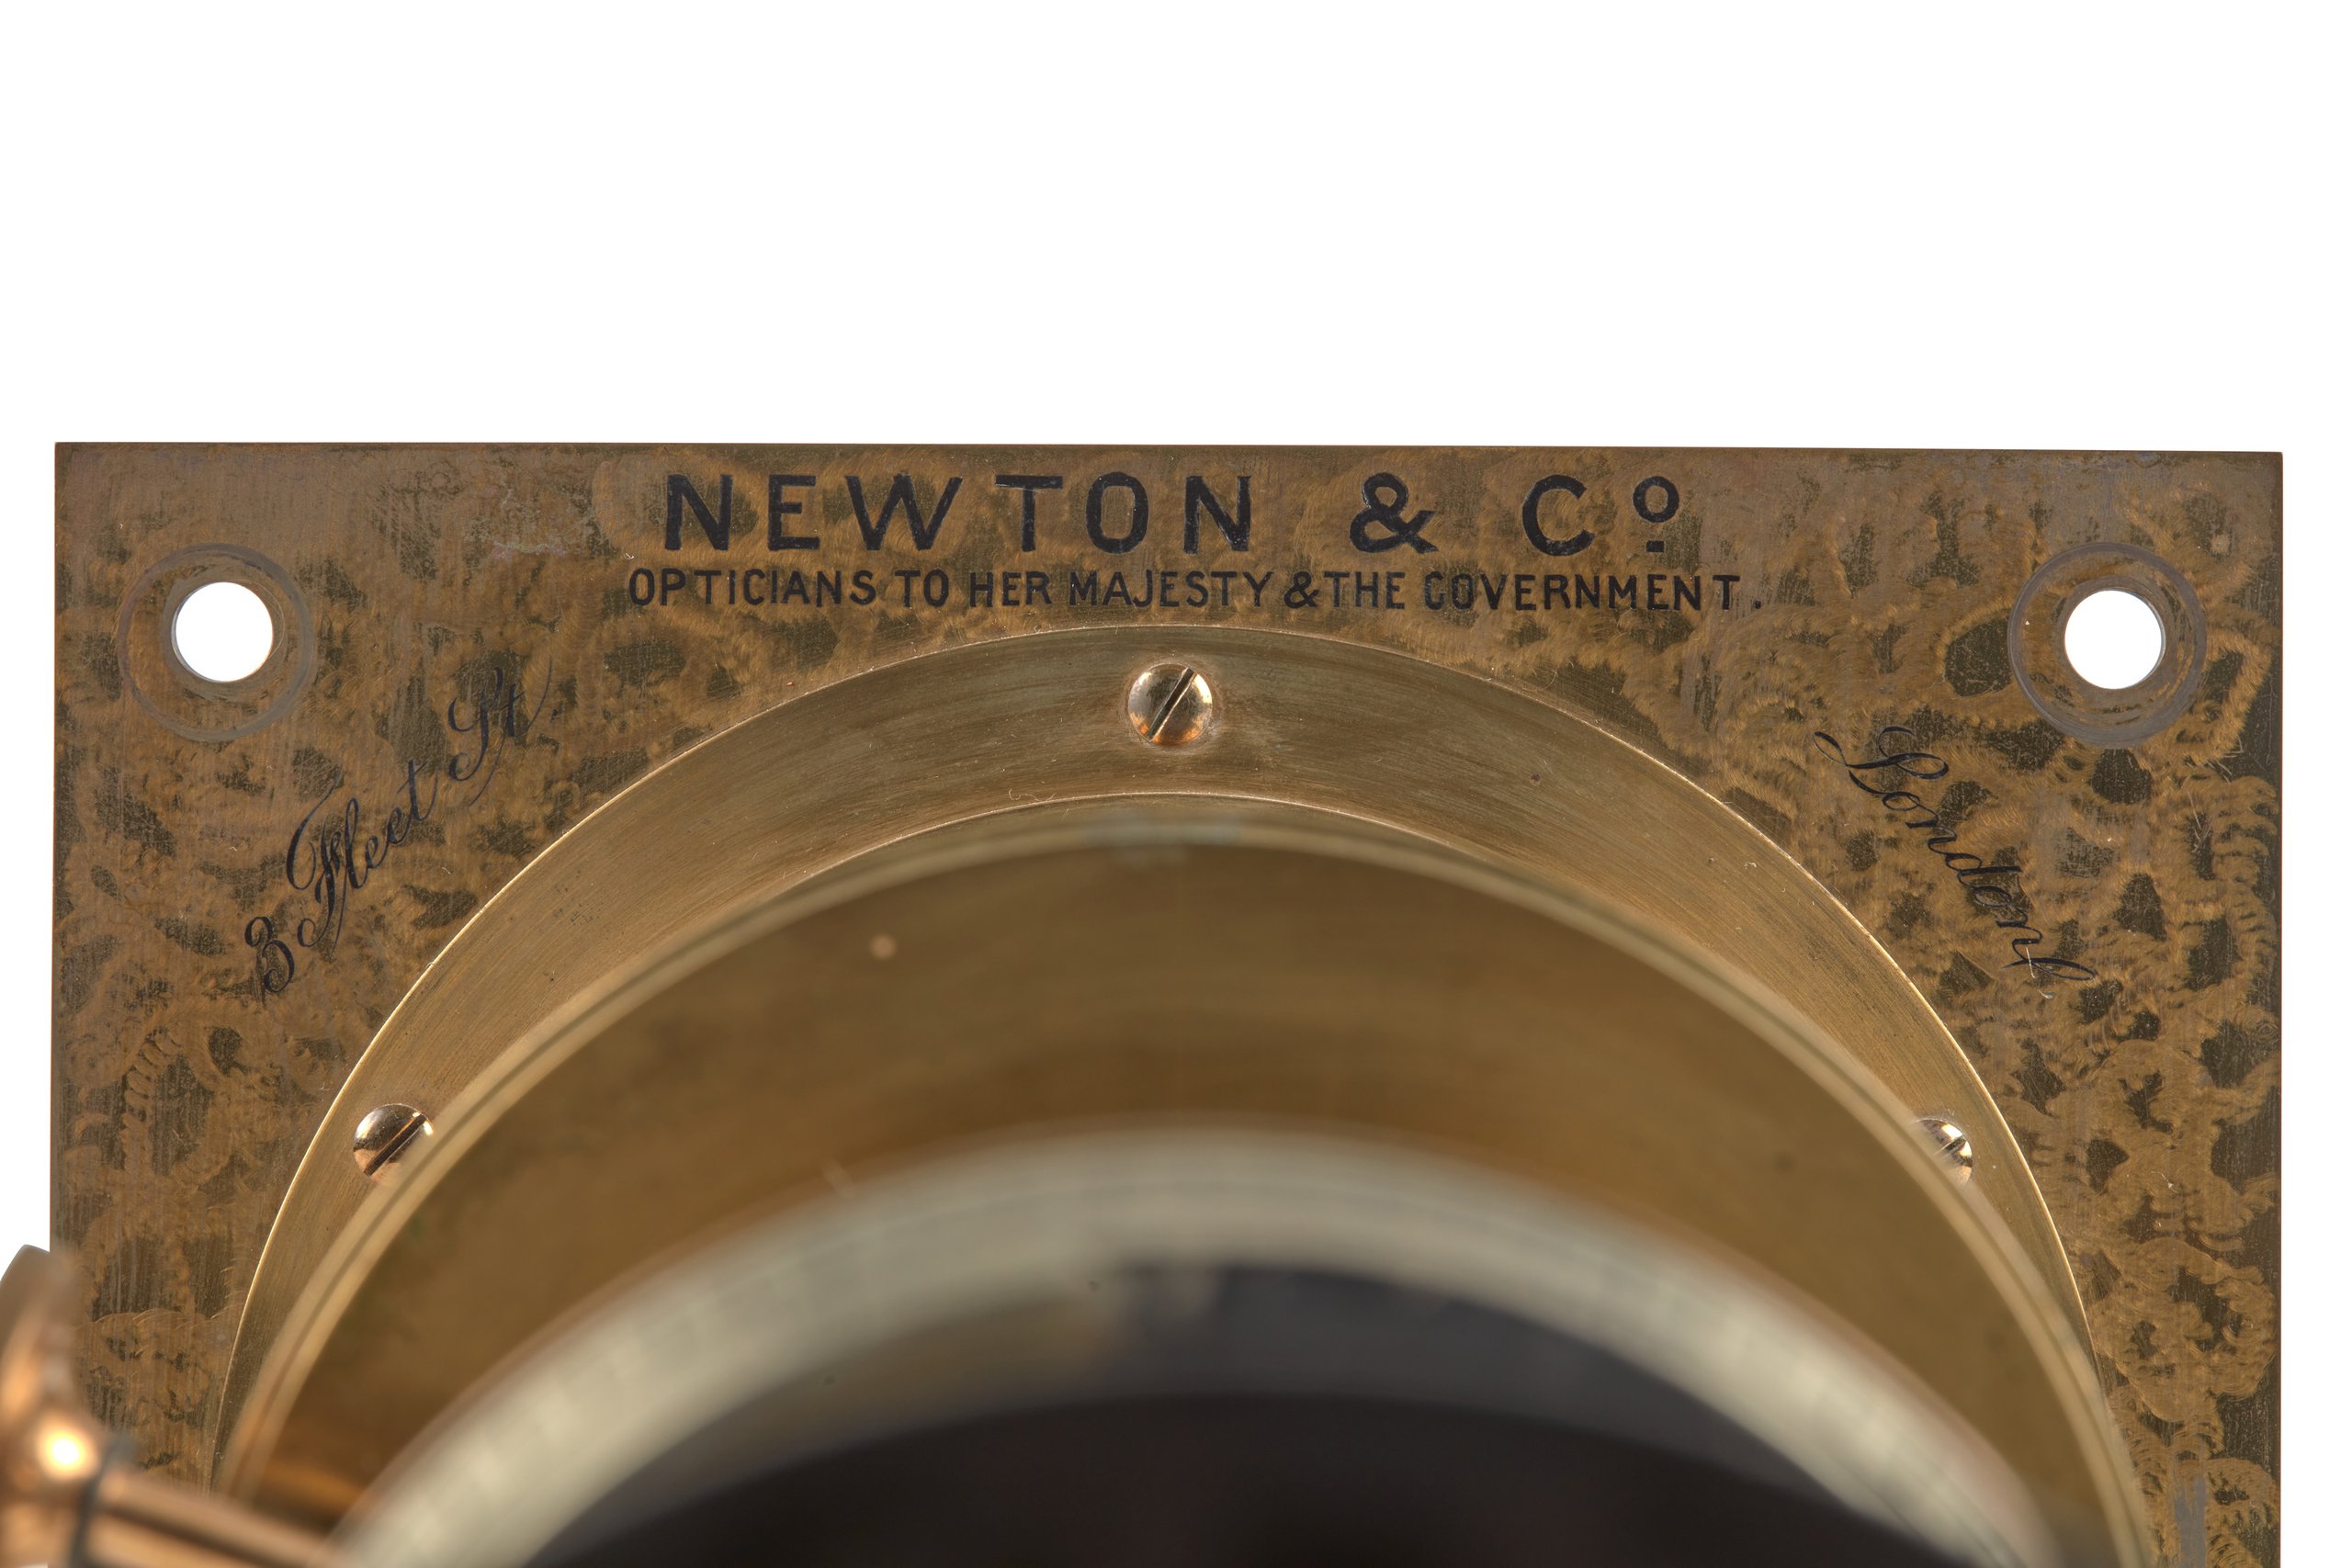 Projection microscope made by Newton & Co and used by Royal Society of New South Wales